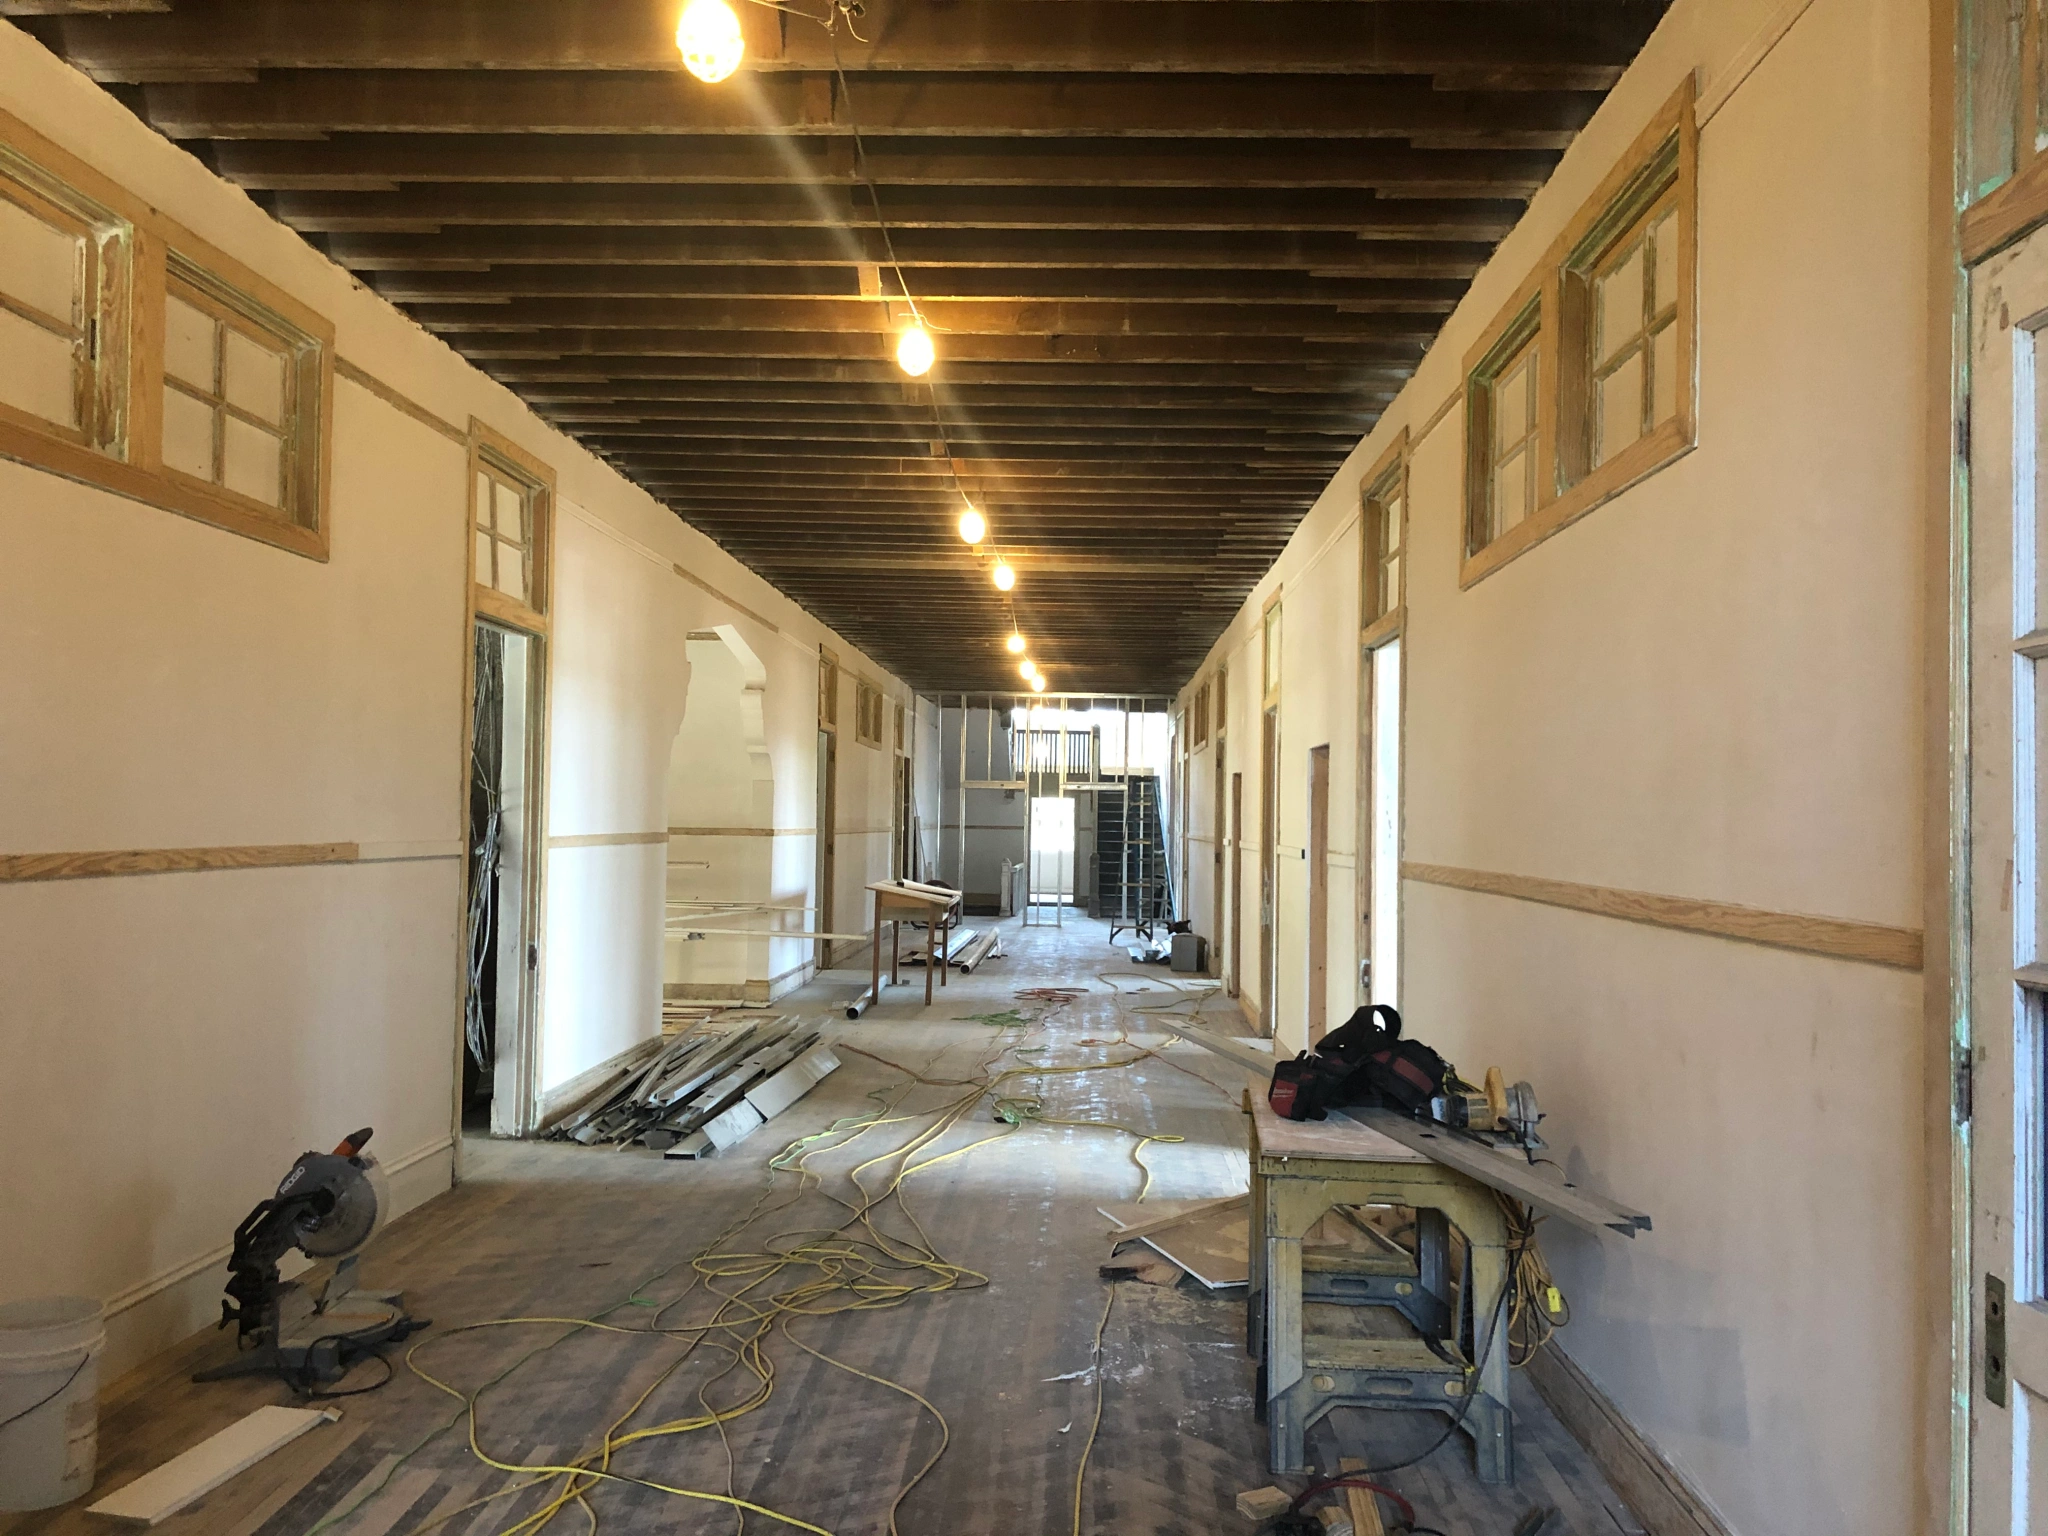 An interior hallway in the Tate, Etienne, and Prevost Center during during lead and asbestos abatement in 2020. The ceiling rafters are visible with light bulbs strung along them, and the floor is covered in extension cords, lumber, and tools.